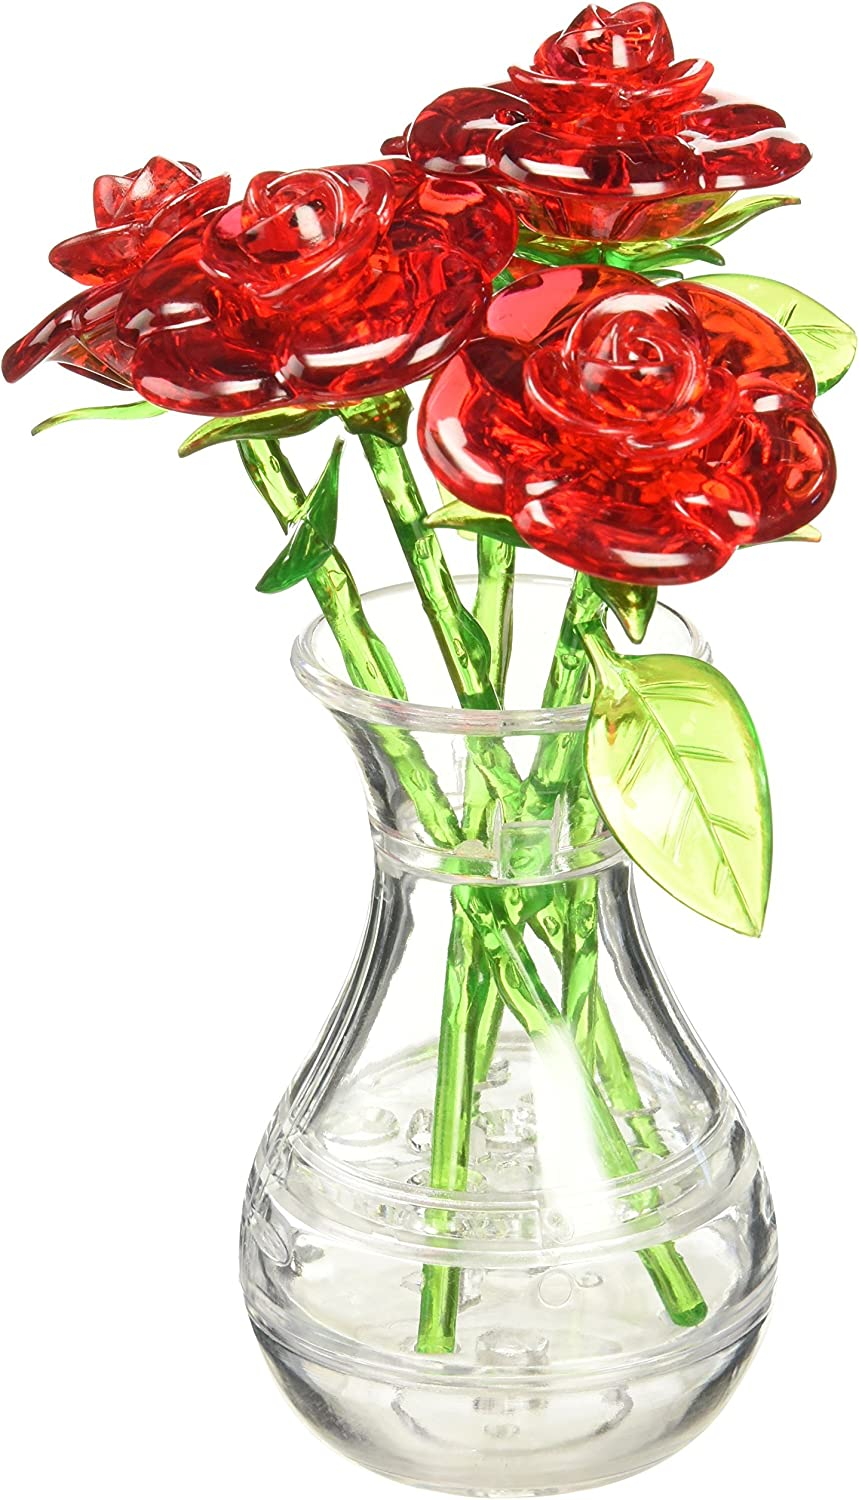 Primary image for Bepuzzled Original 3D Crystal Jigsaw Puzzle - Red Roses, Brain Teaser